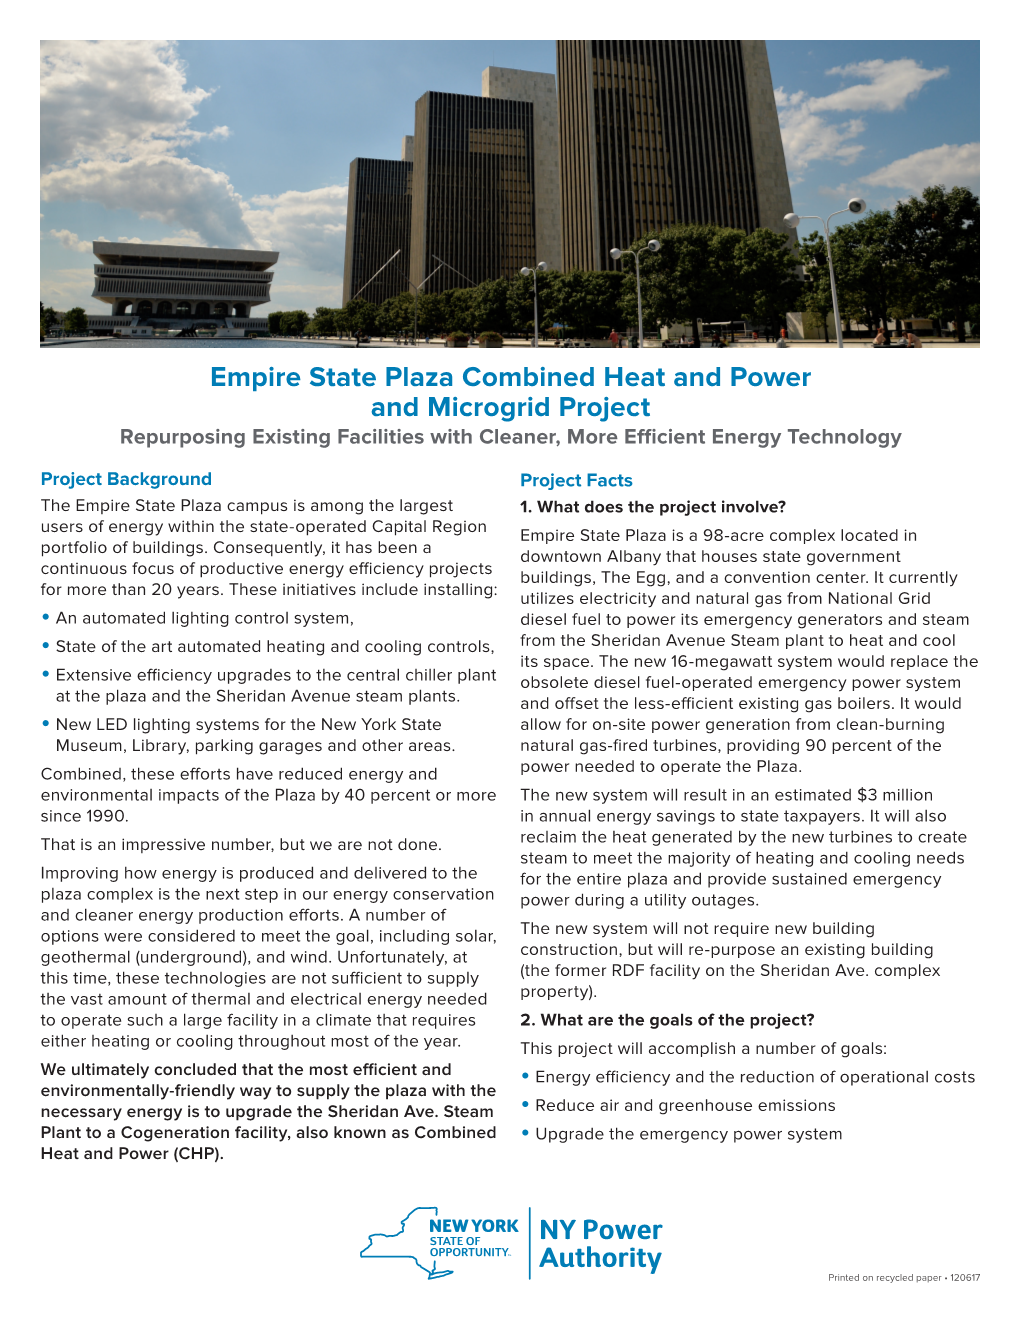 Empire State Plaza Combined Heat and Power and Microgrid Project Repurposing Existing Facilities with Cleaner, More Efficient Energy Technology